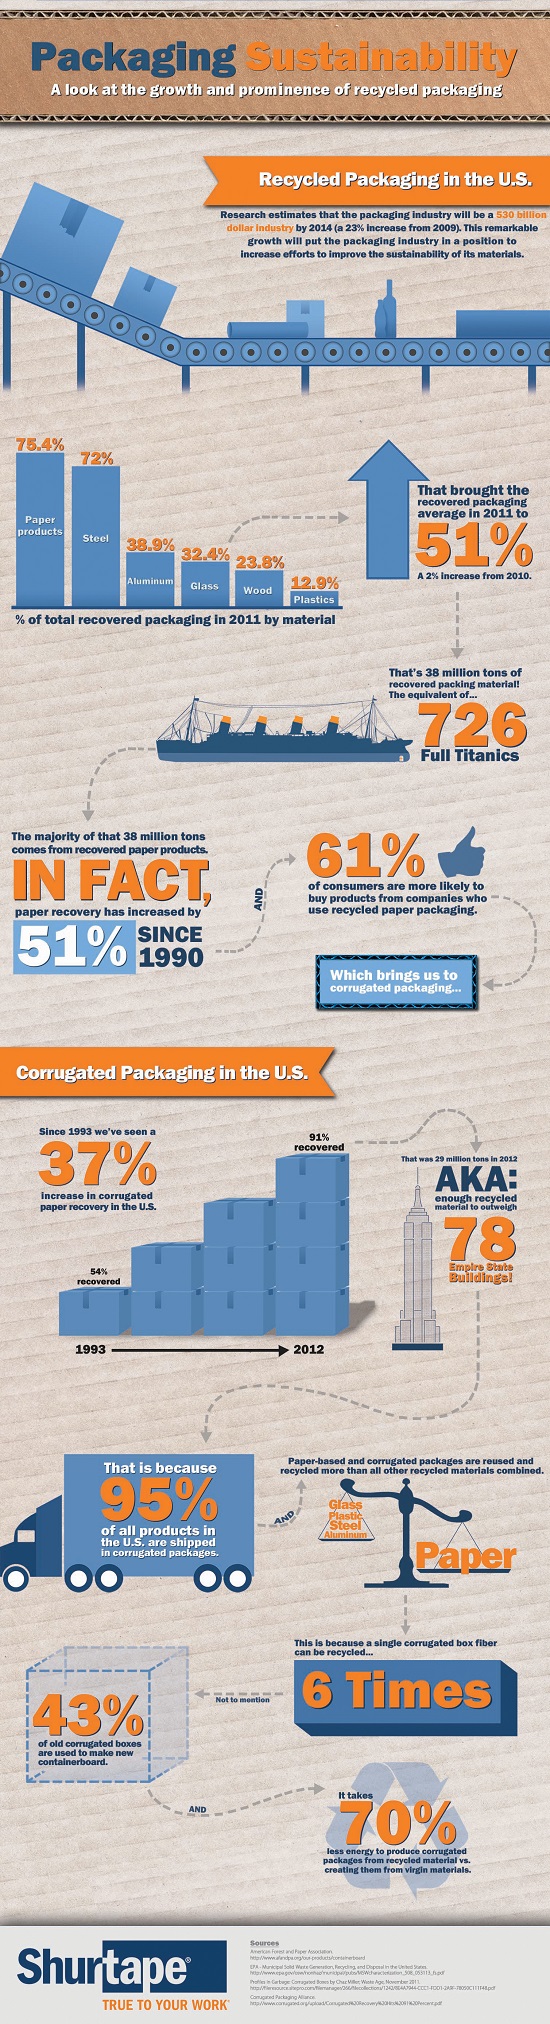 Infographic Illustrates Growth and Prominence of Recycled Packaging